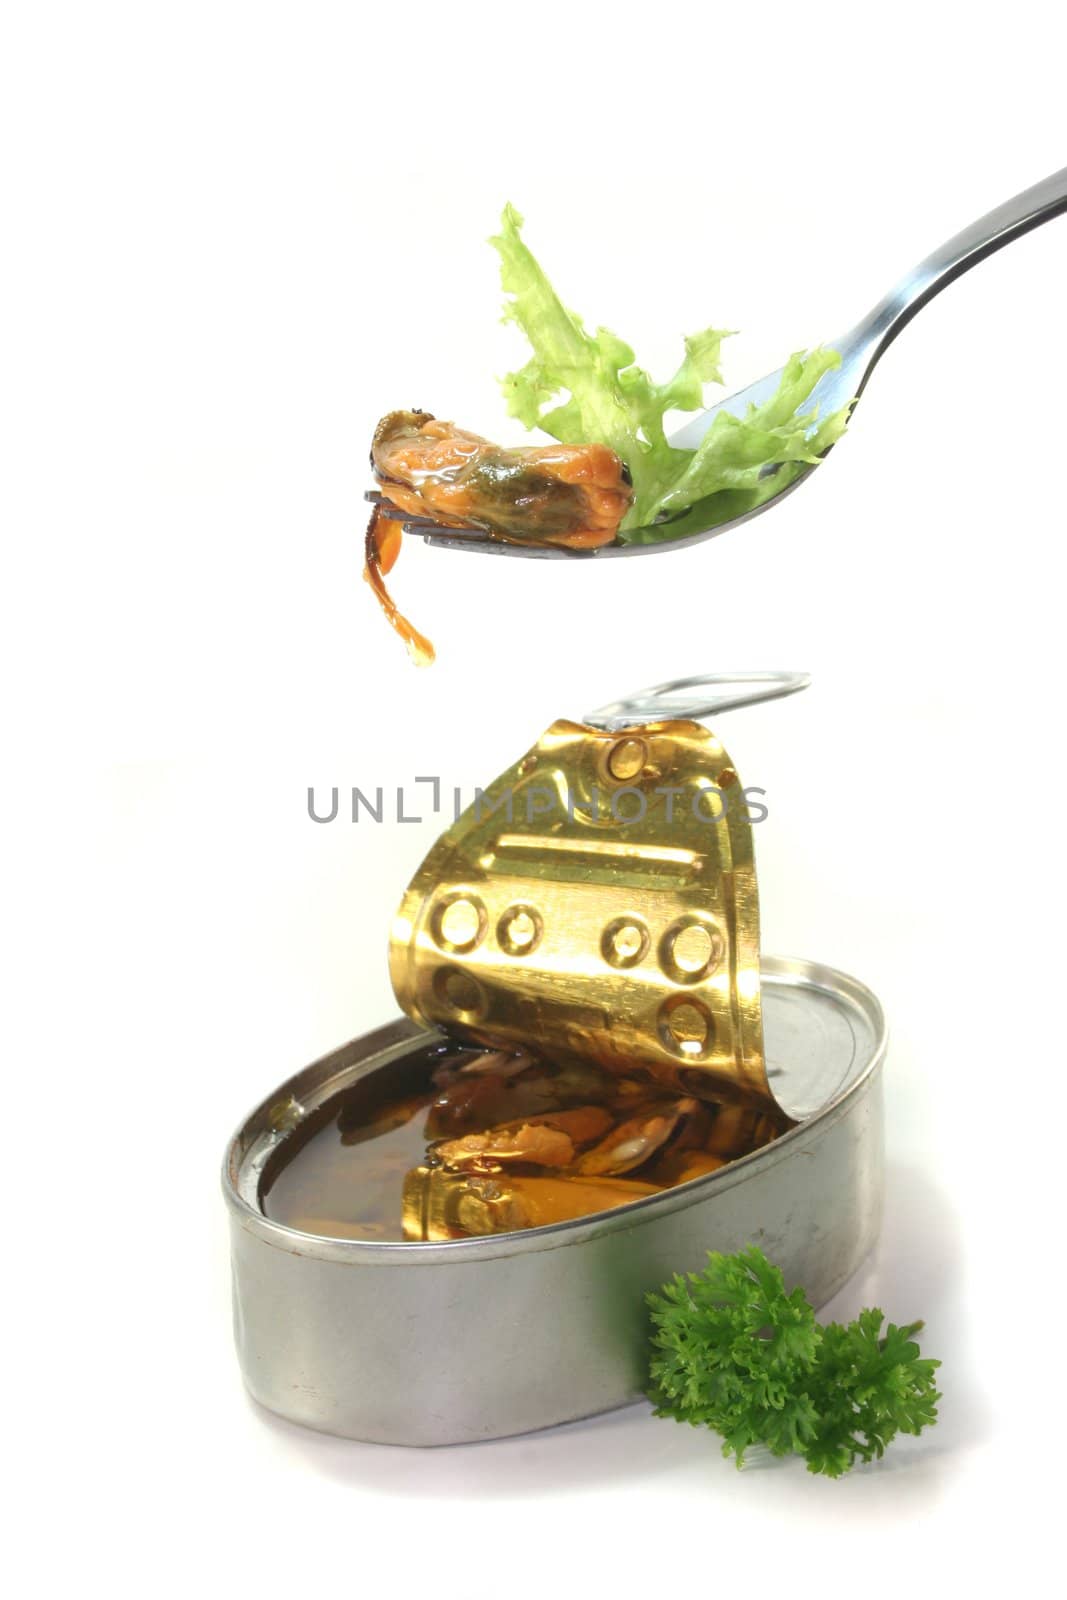 Mussel on a fork with salad on a white background